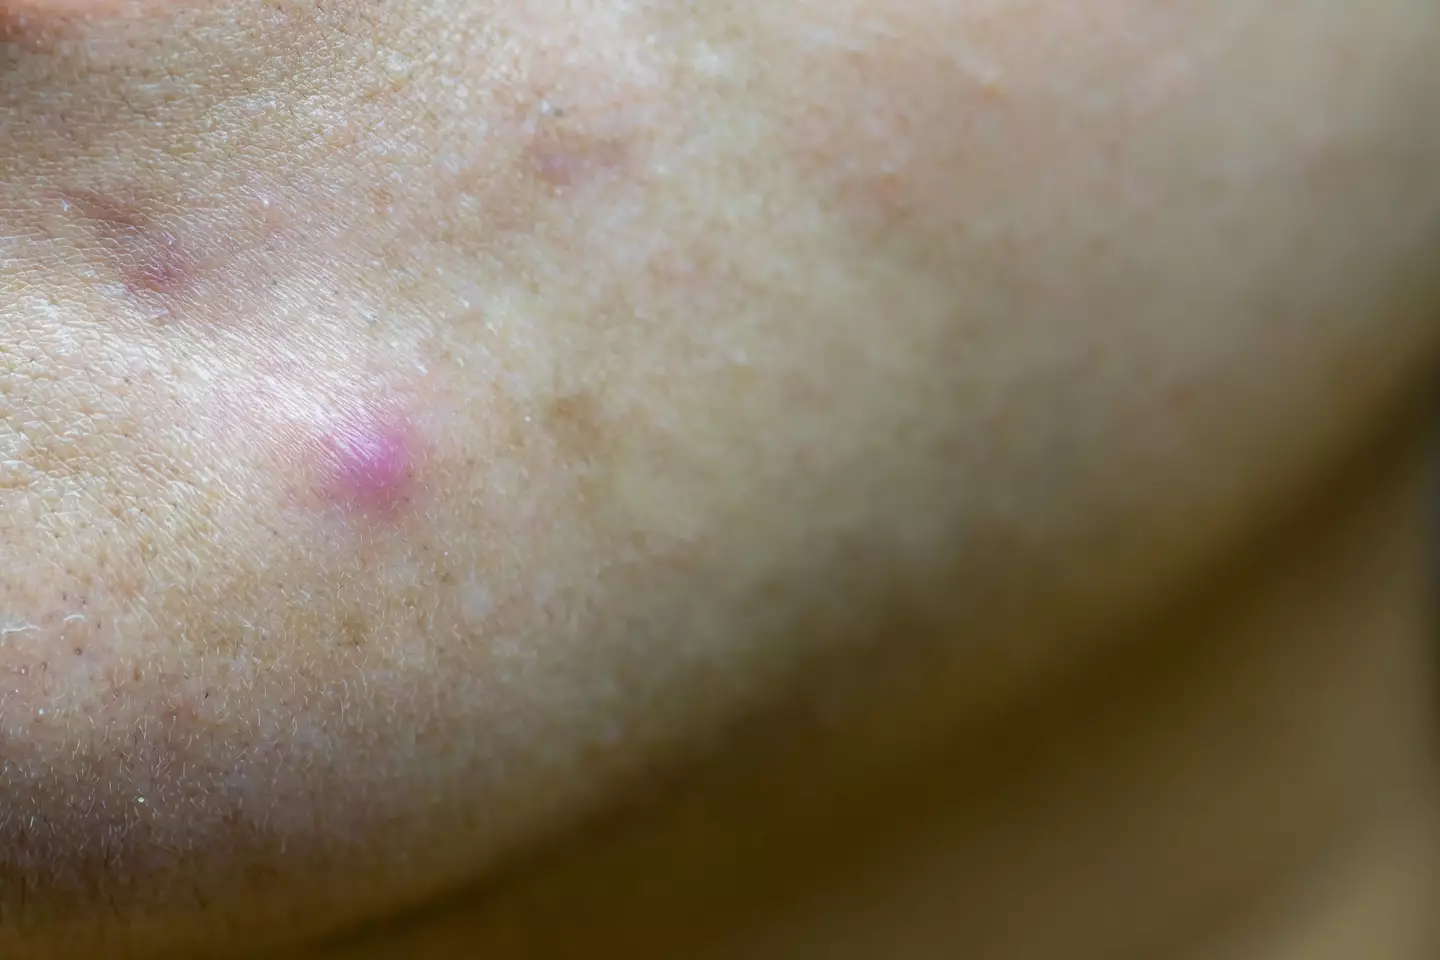 Cystic spots should be treated as opposed to squeezed.